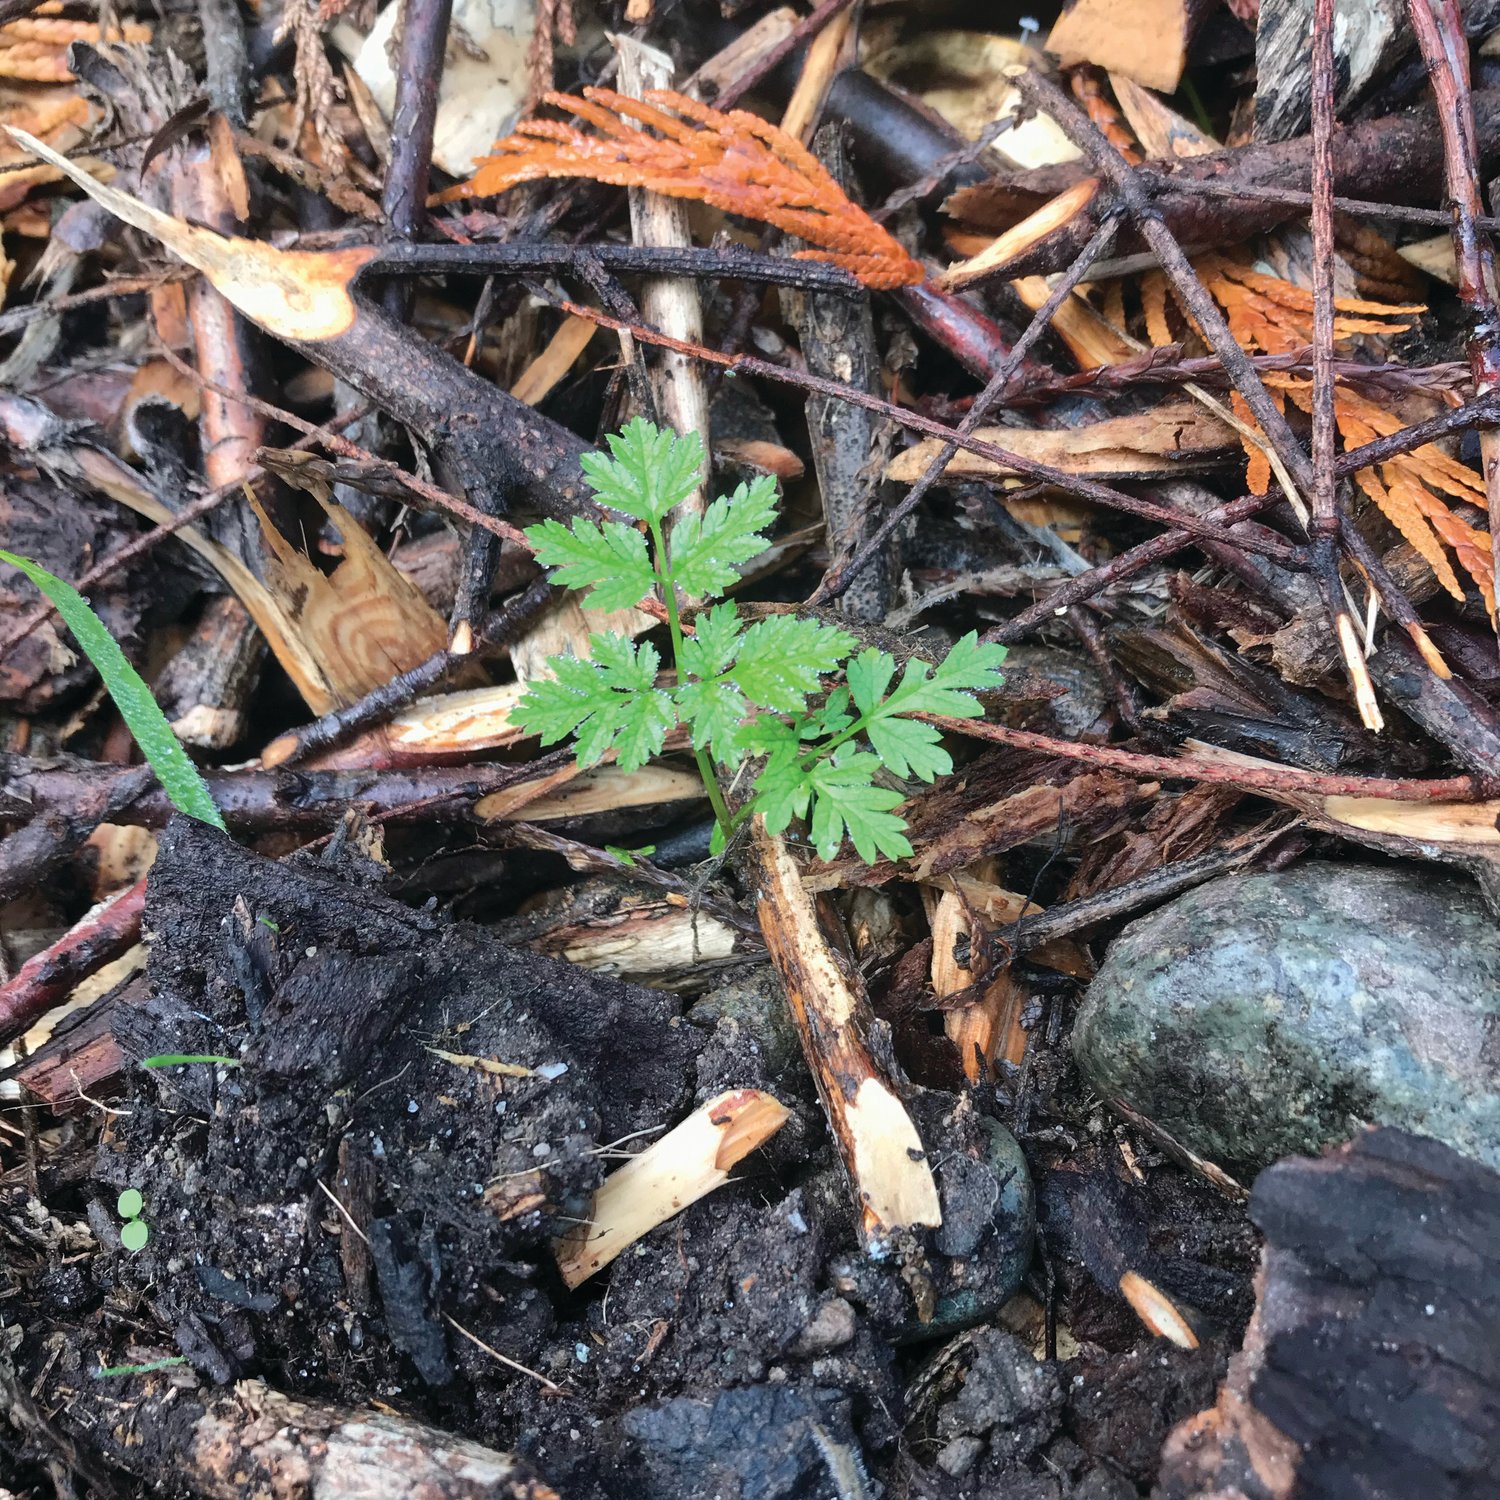 Poison hemlock seedling at the beginning of its biennial cycle. Carefully remove all parts of the plant using protective clothing and gloves.